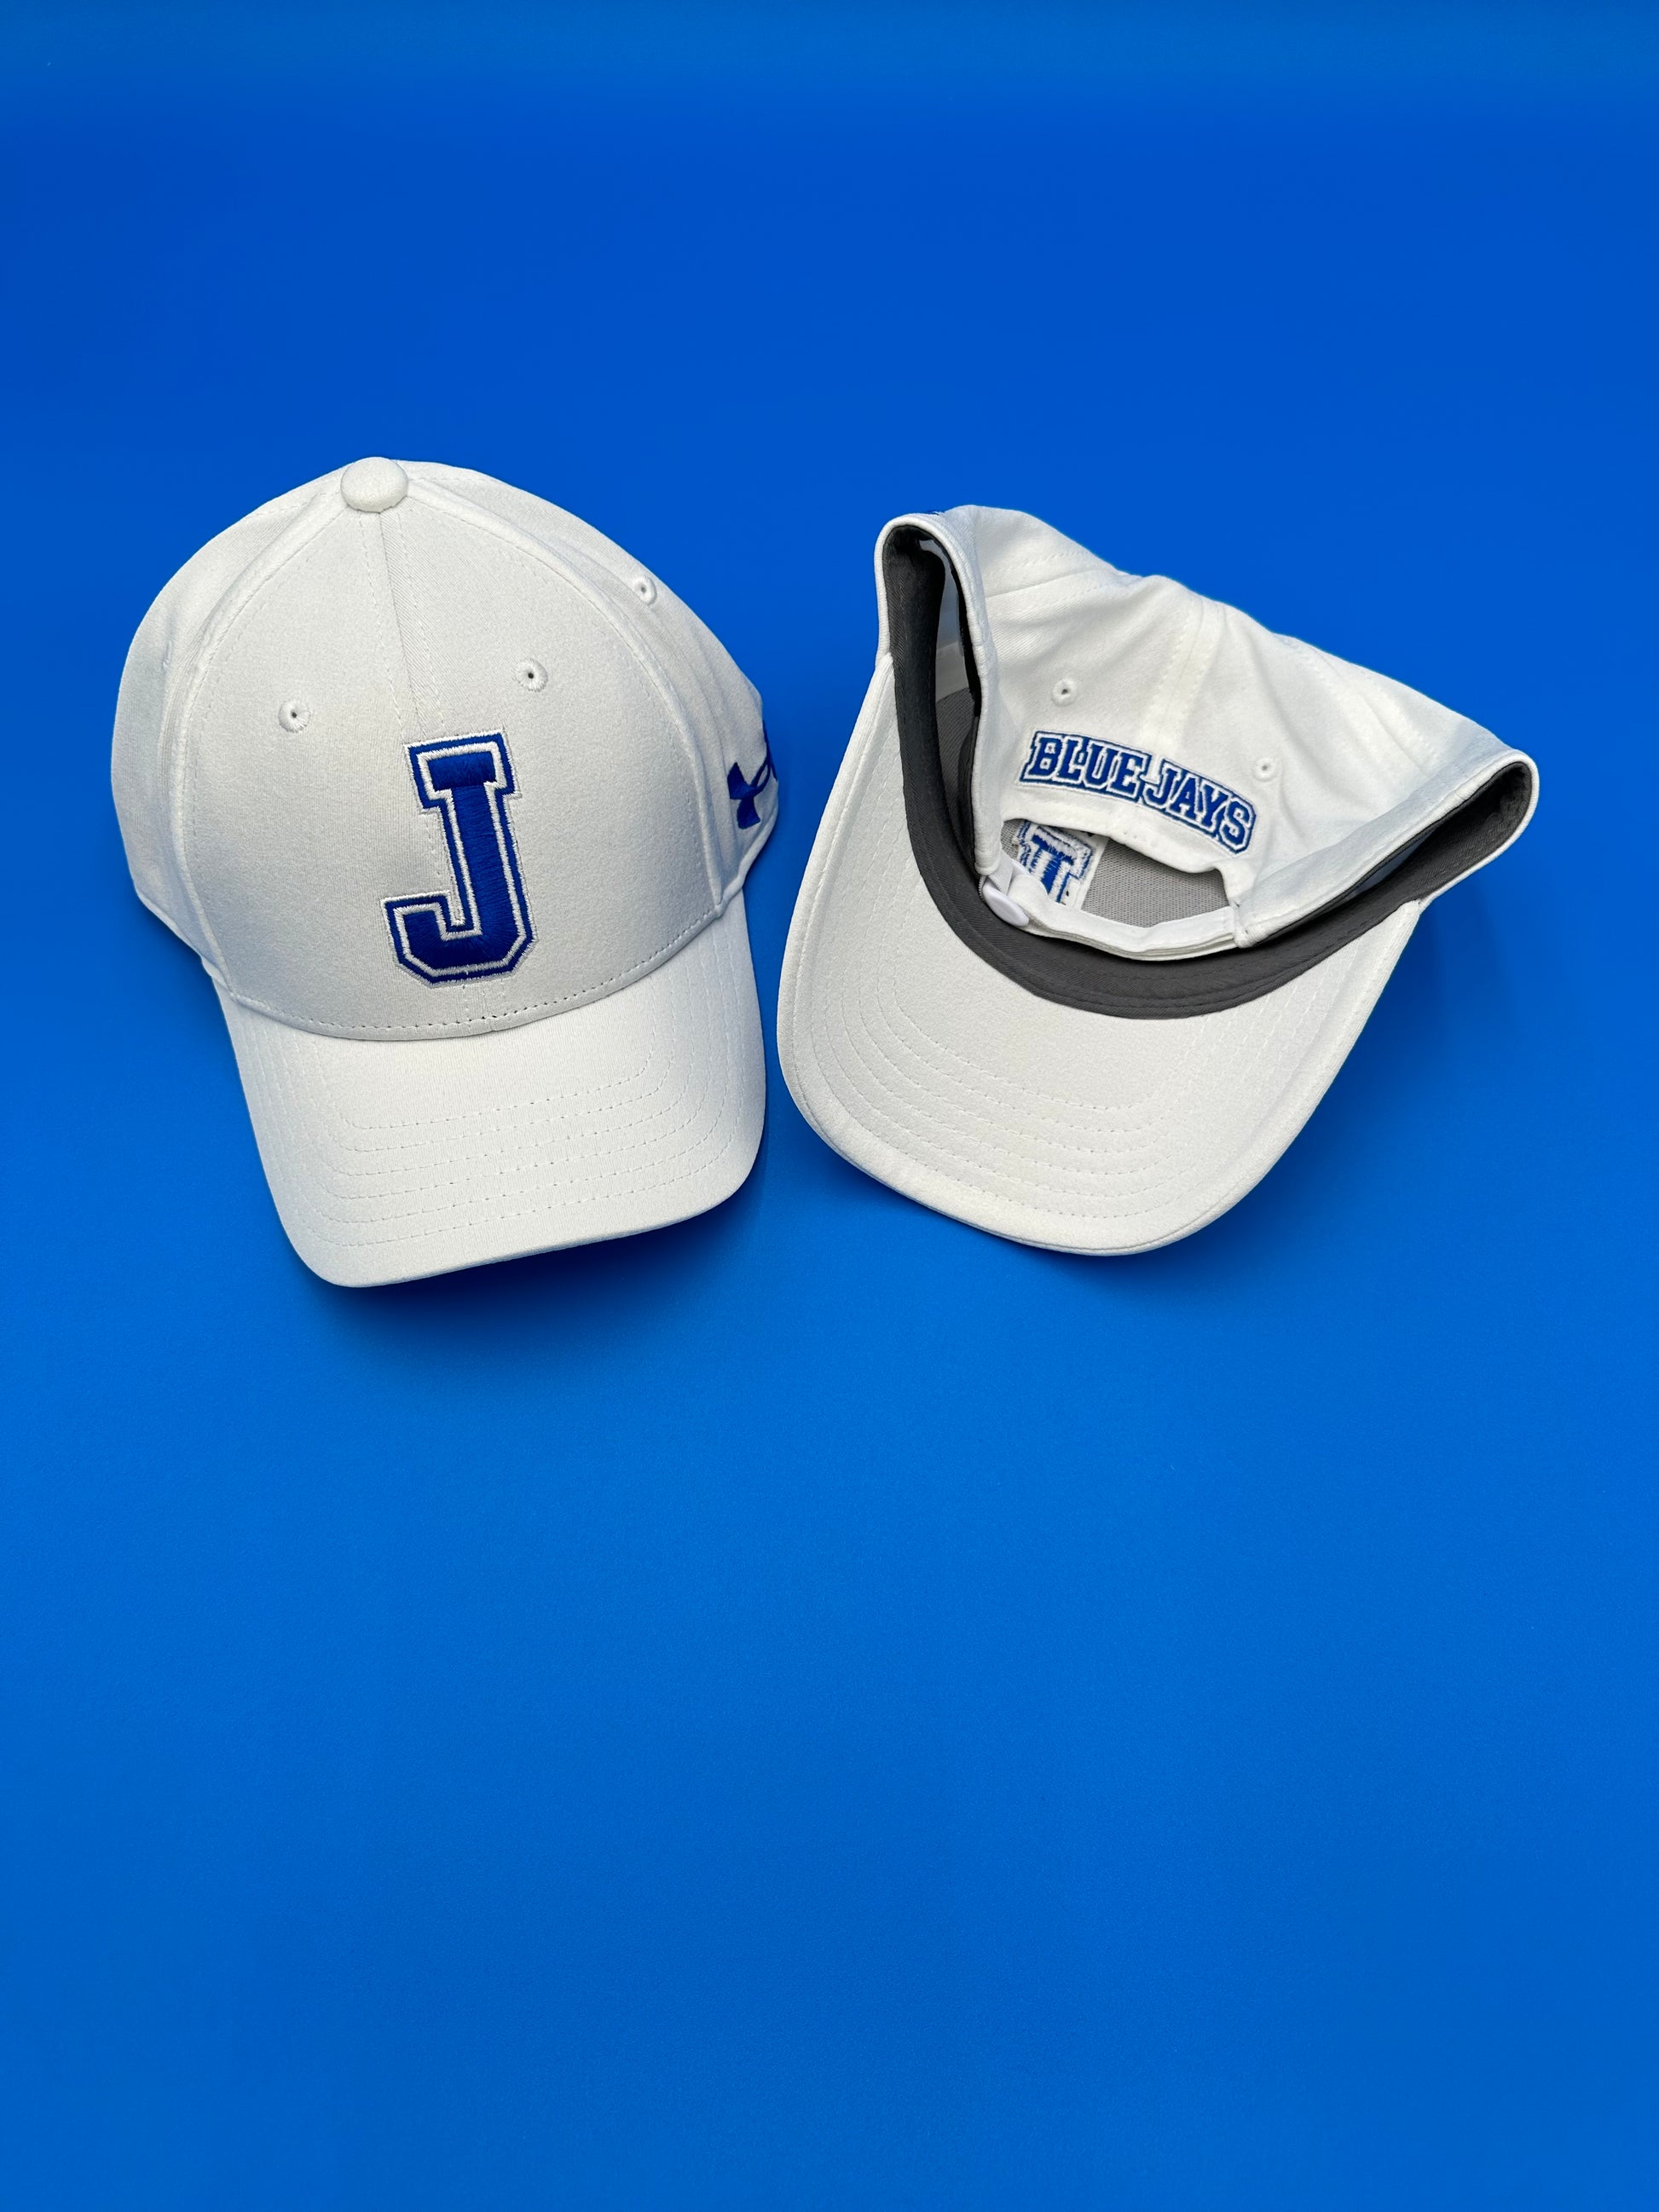 Under Armour  100% Polyester.  Relaxed unstructured adjustable. Antimicrobial fabric.  6 panel construction w/elastic back Velcro closure.  J with Blue Jays on backside.